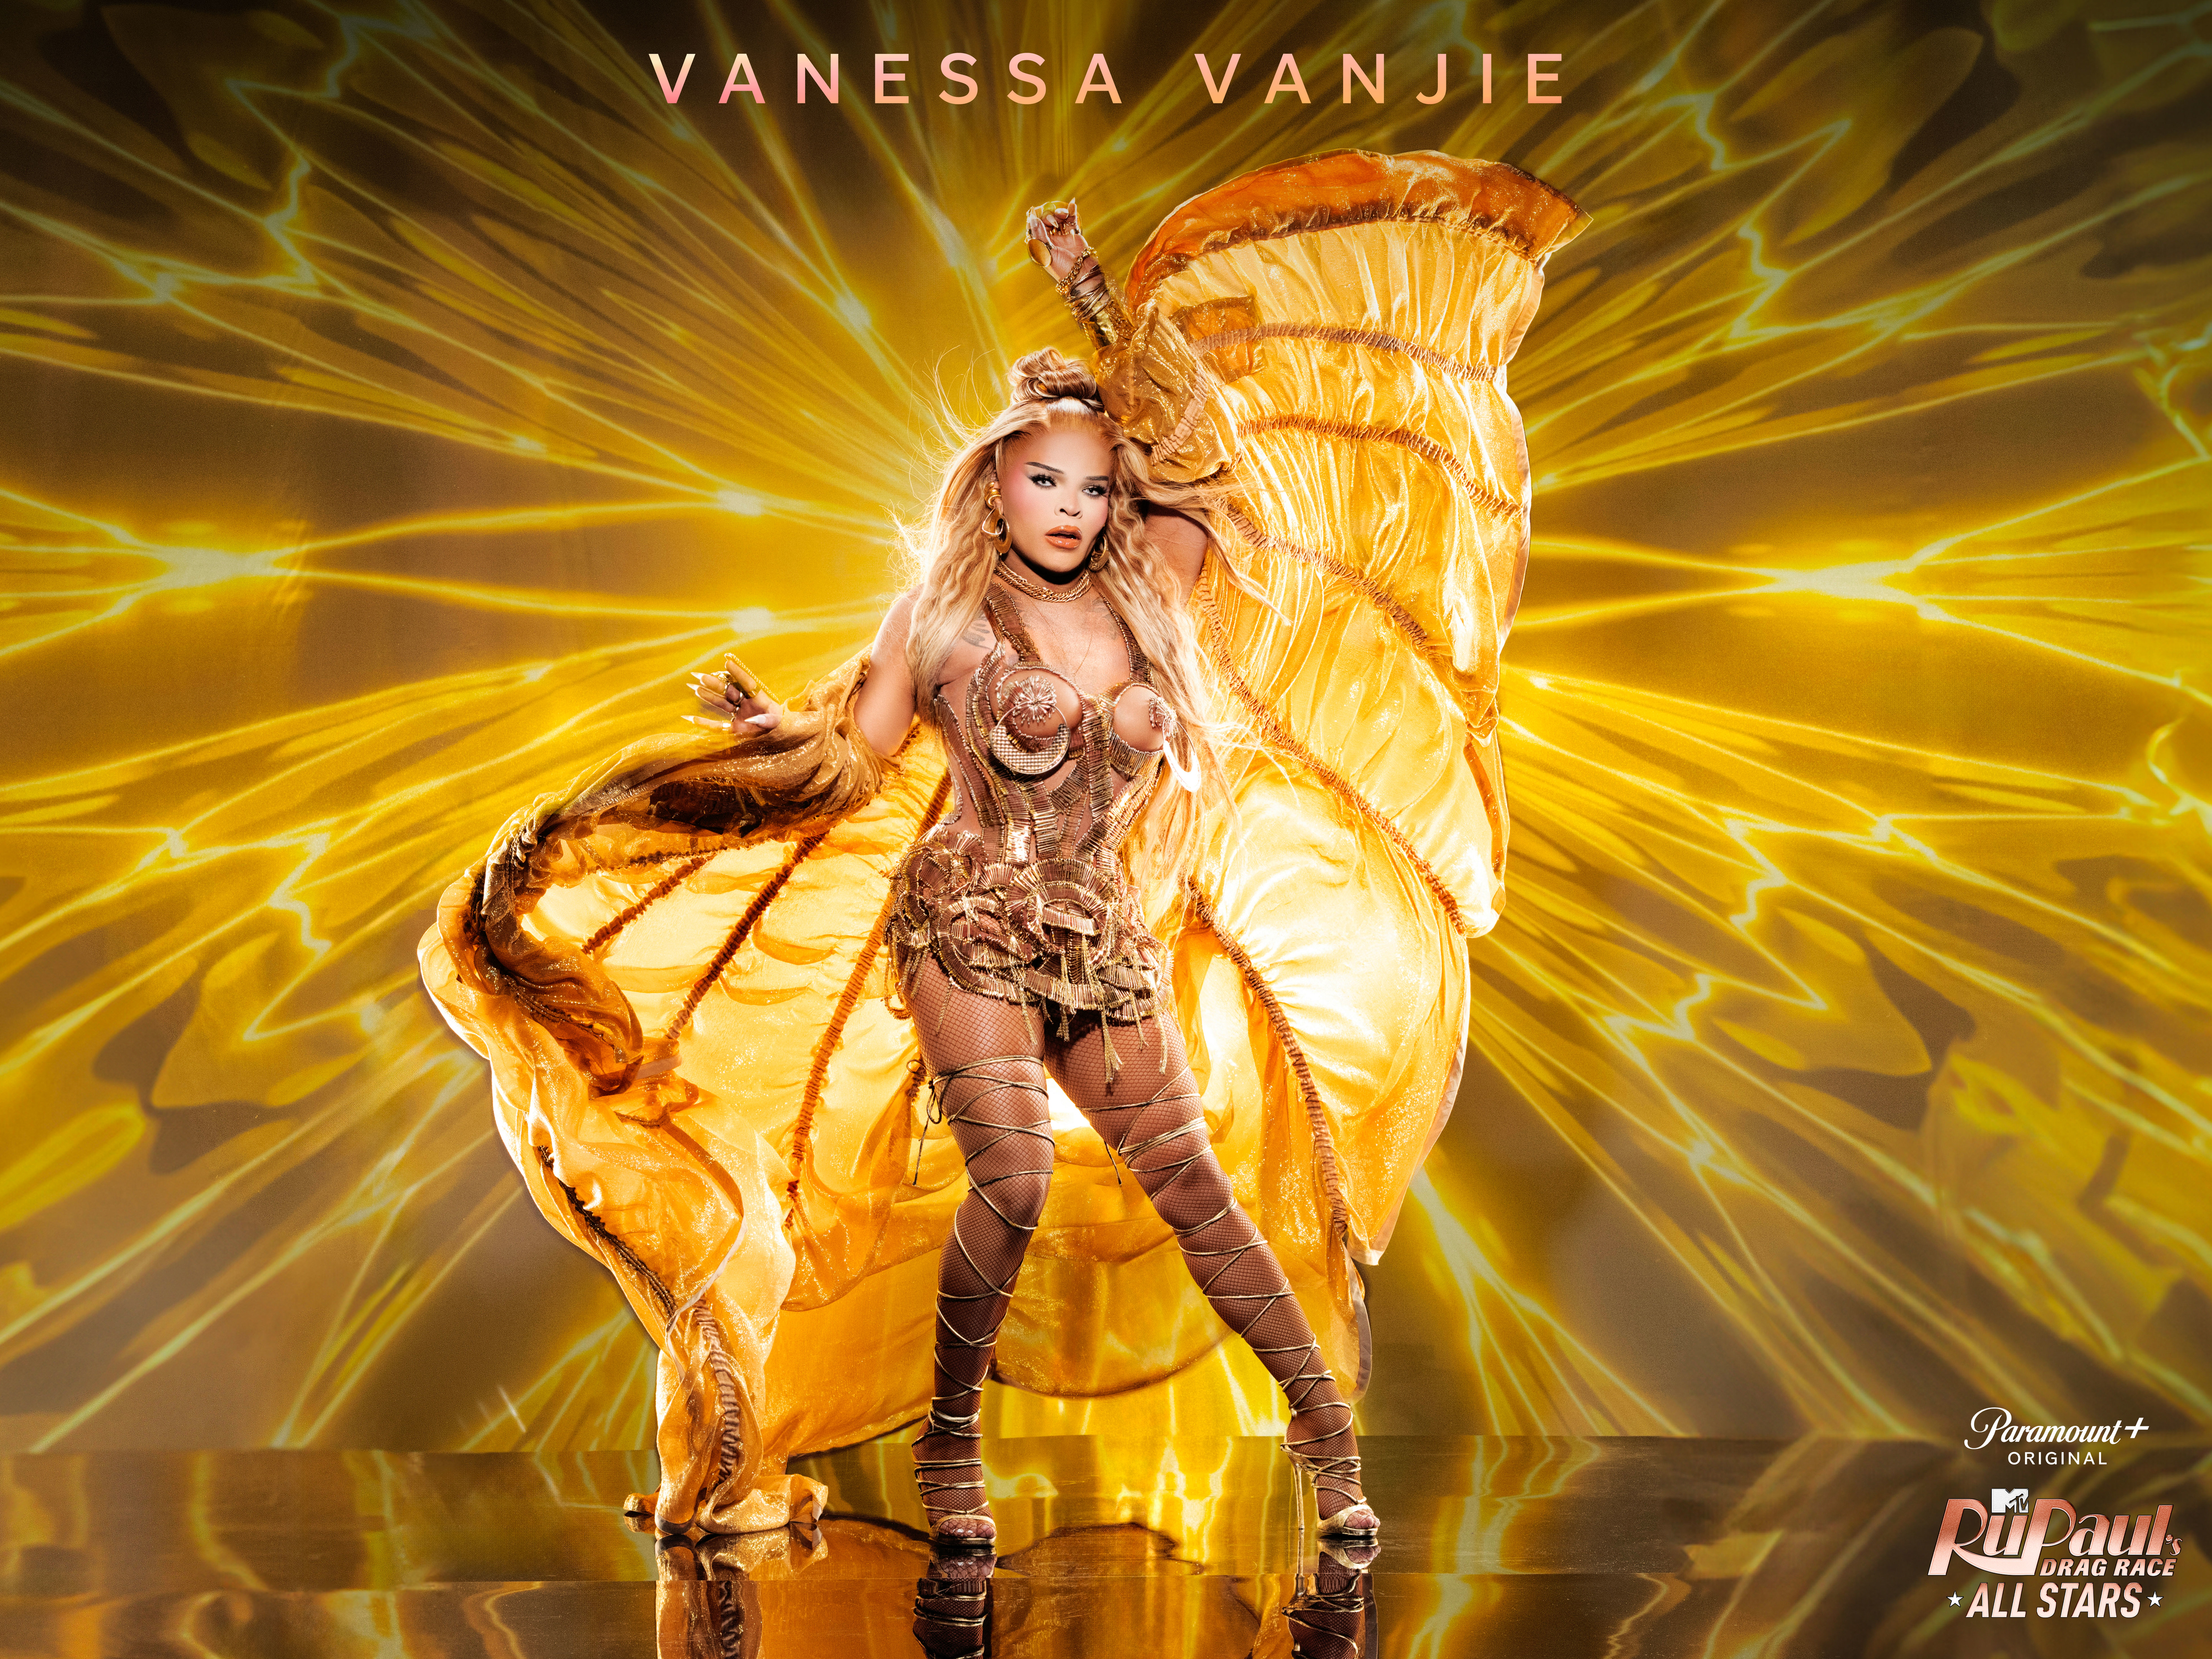 Vanessa Vanjie in a striking performance outfit with large wing-like accessories